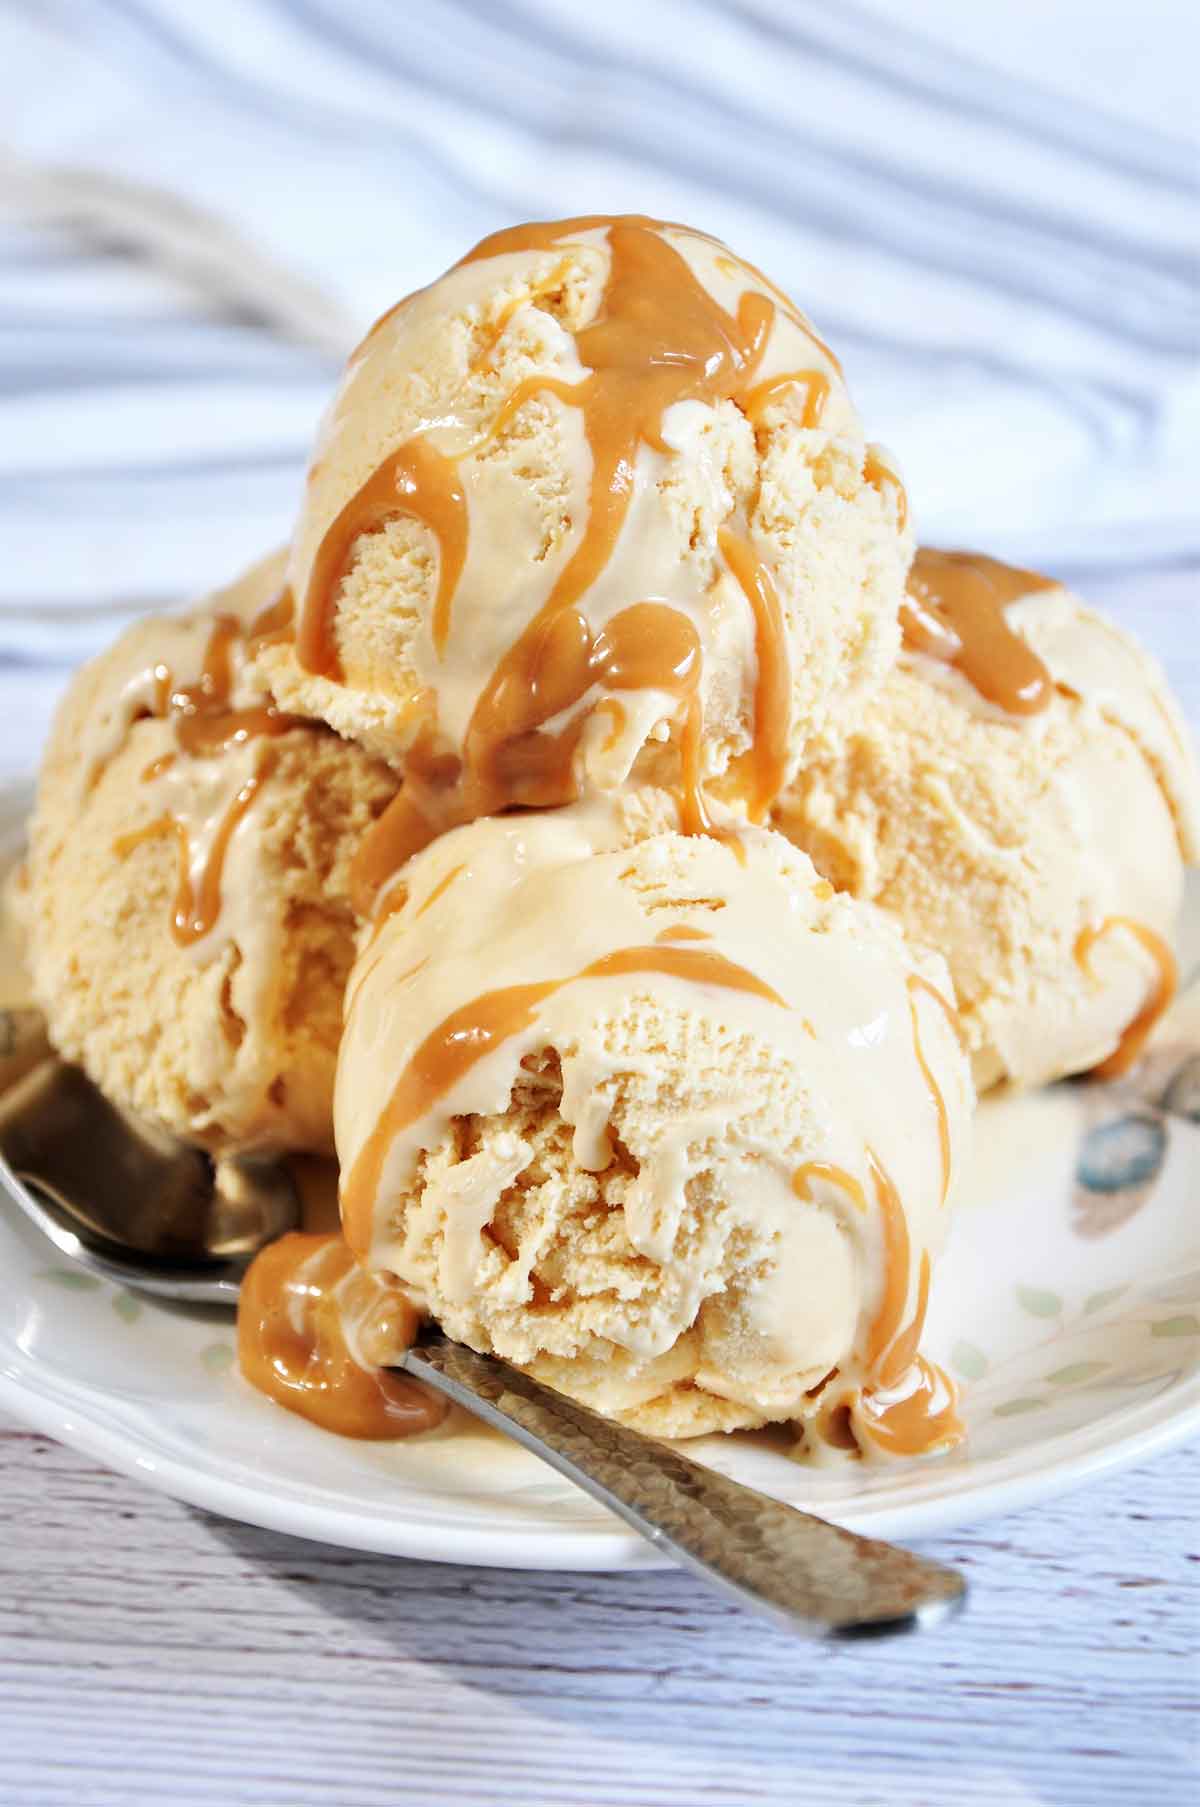 Salted Caramel ice-cream scoops in a plate.